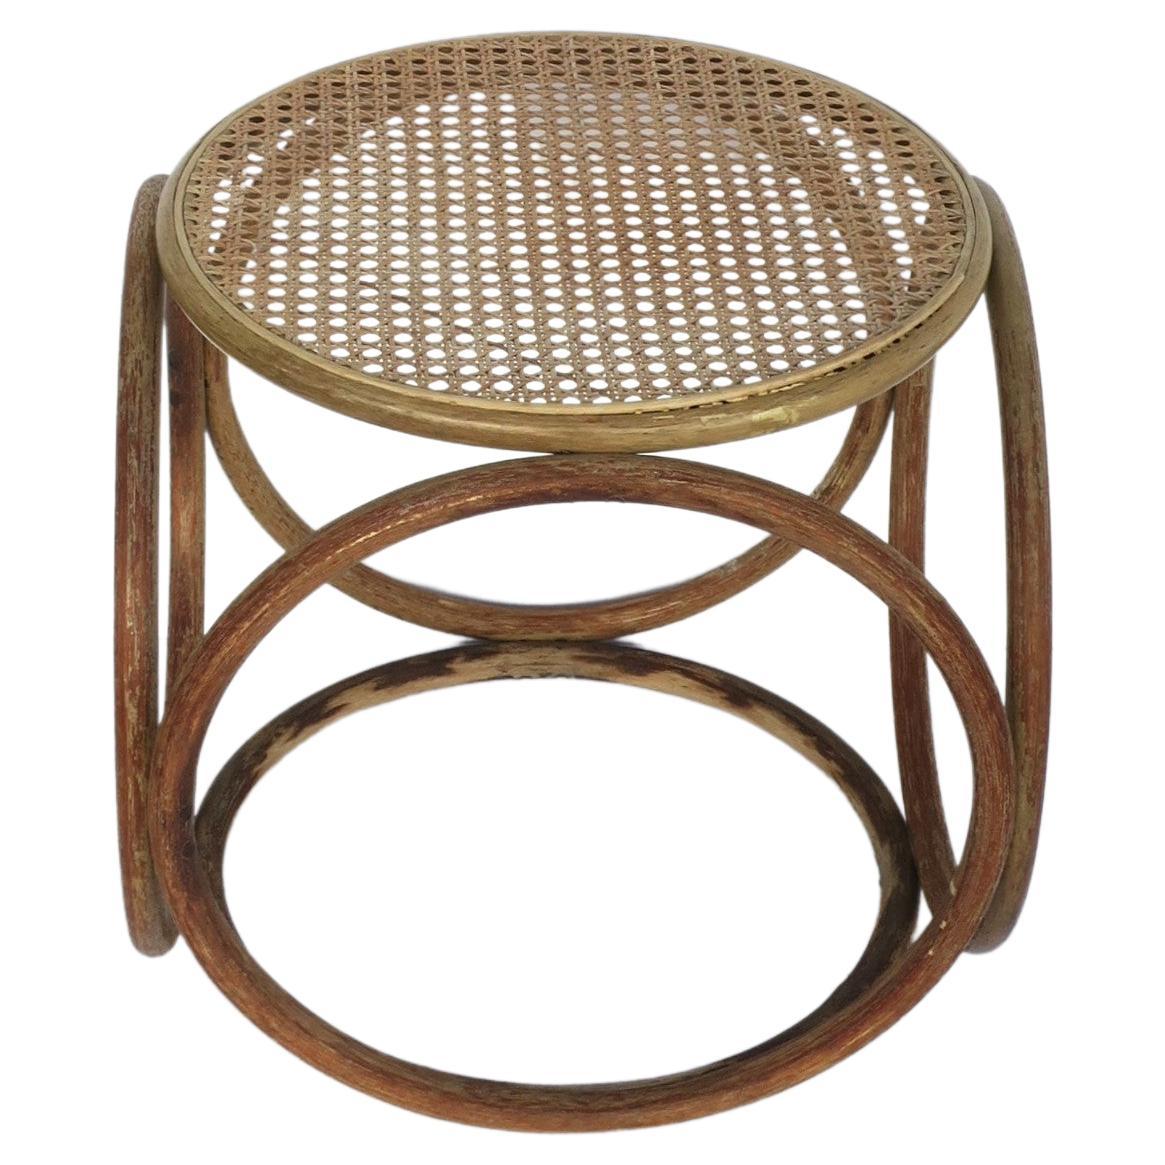 Mid-Century Modern Bentwood and Wicker Cane Stool or Side Drinks Table in the Style of Thonet For Sale